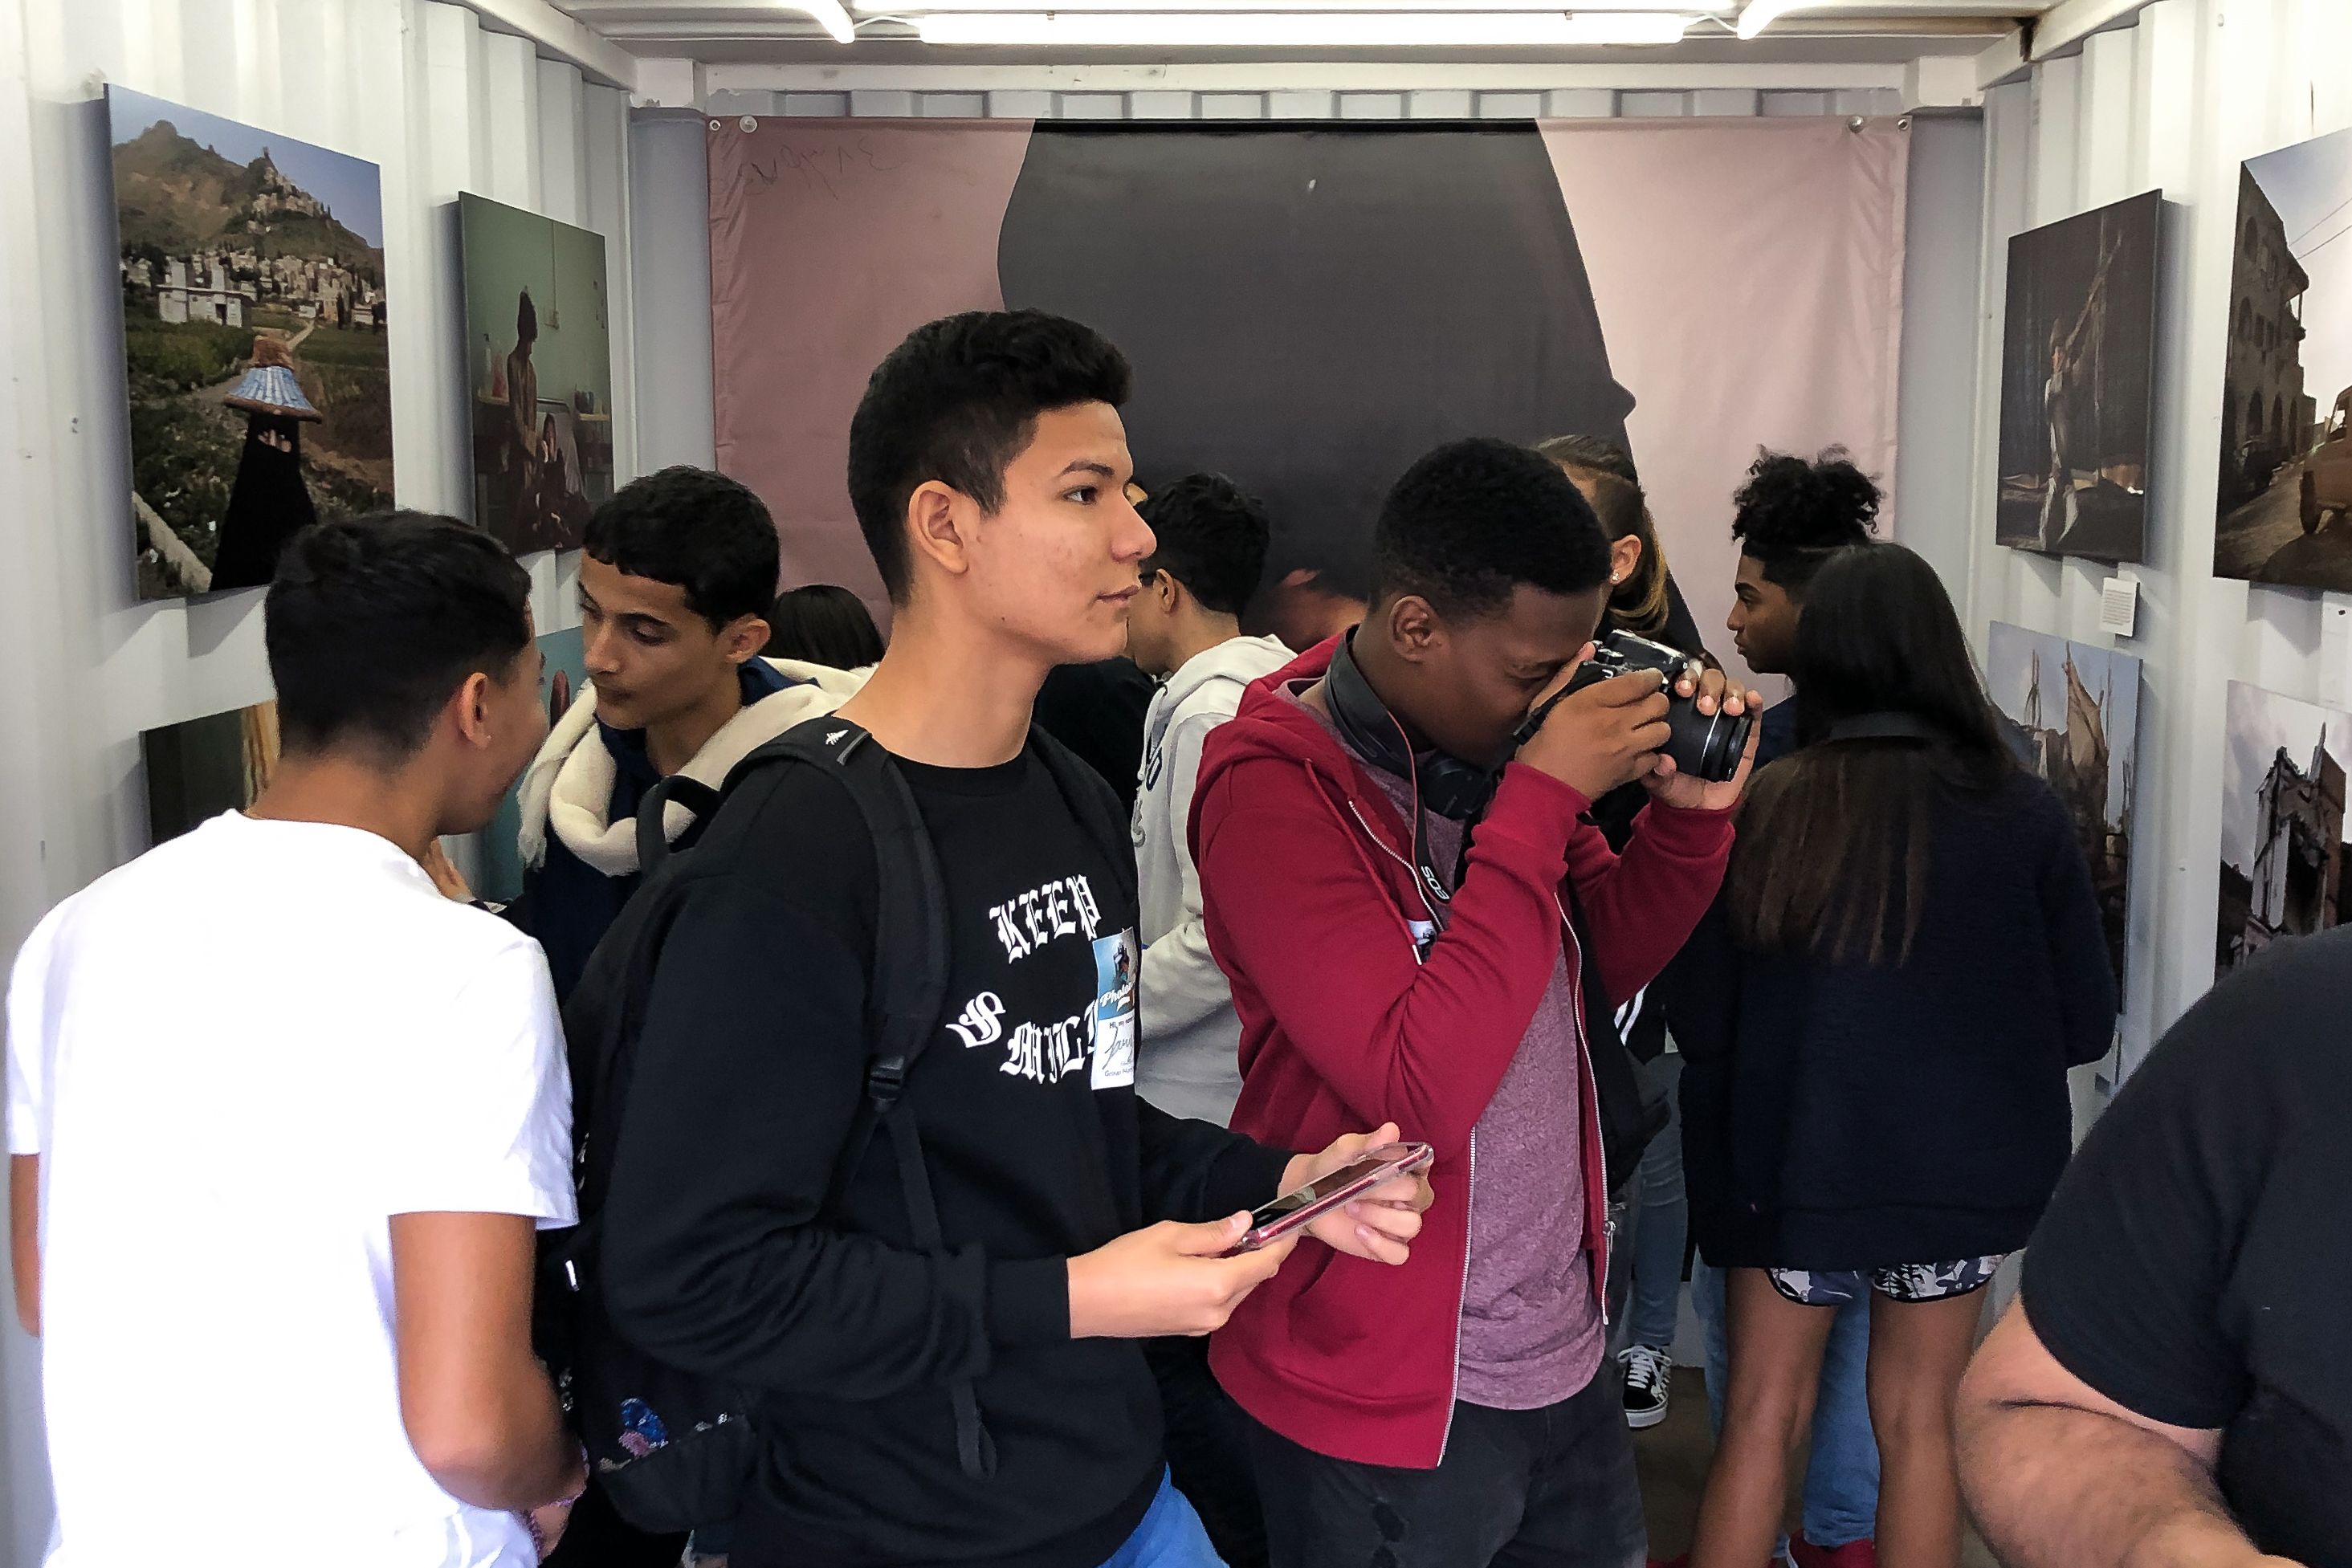 Students explore the exhibit. Image by Claire Seaton. United States, 2019.